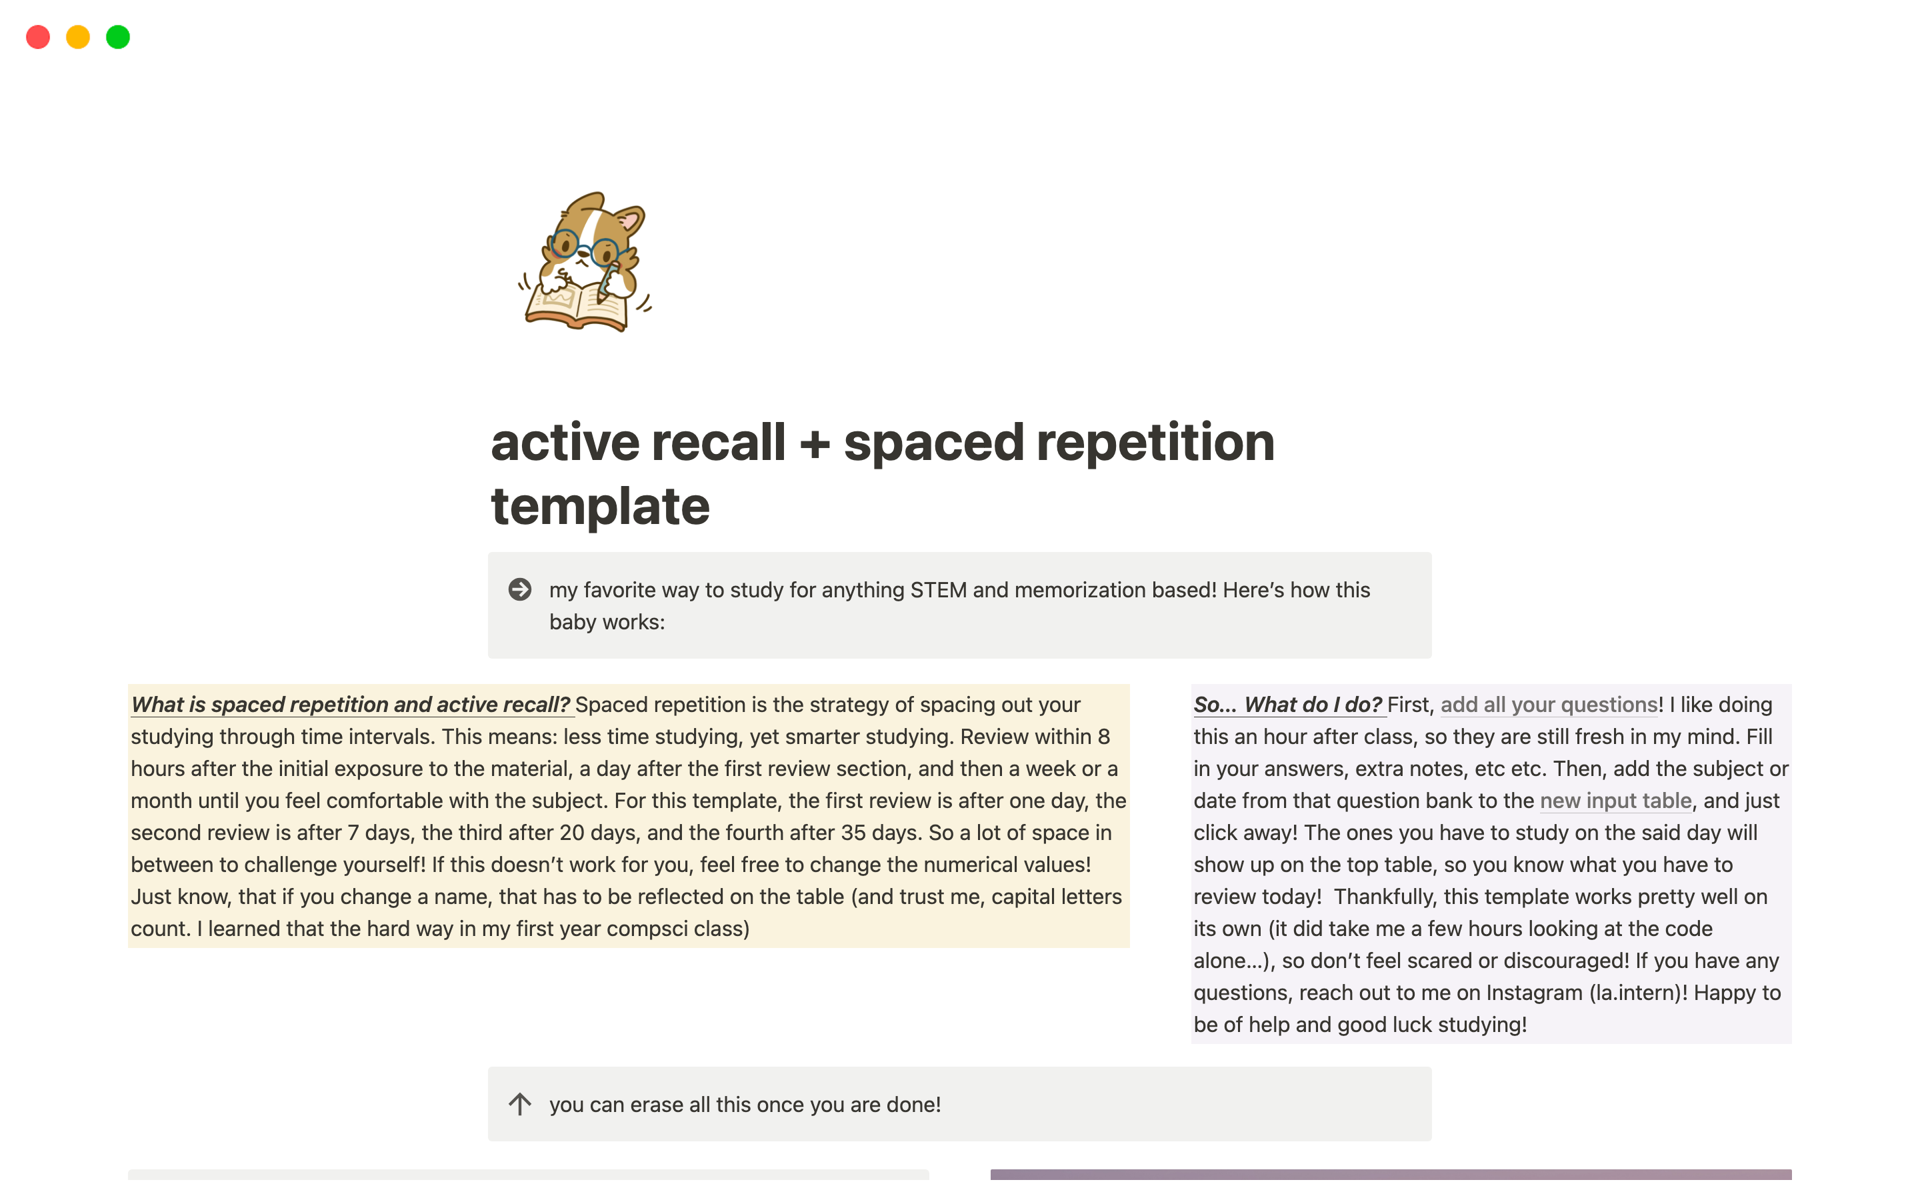 Utilize active recall and spaced repetition to succeed when it comes to dense academic topics!